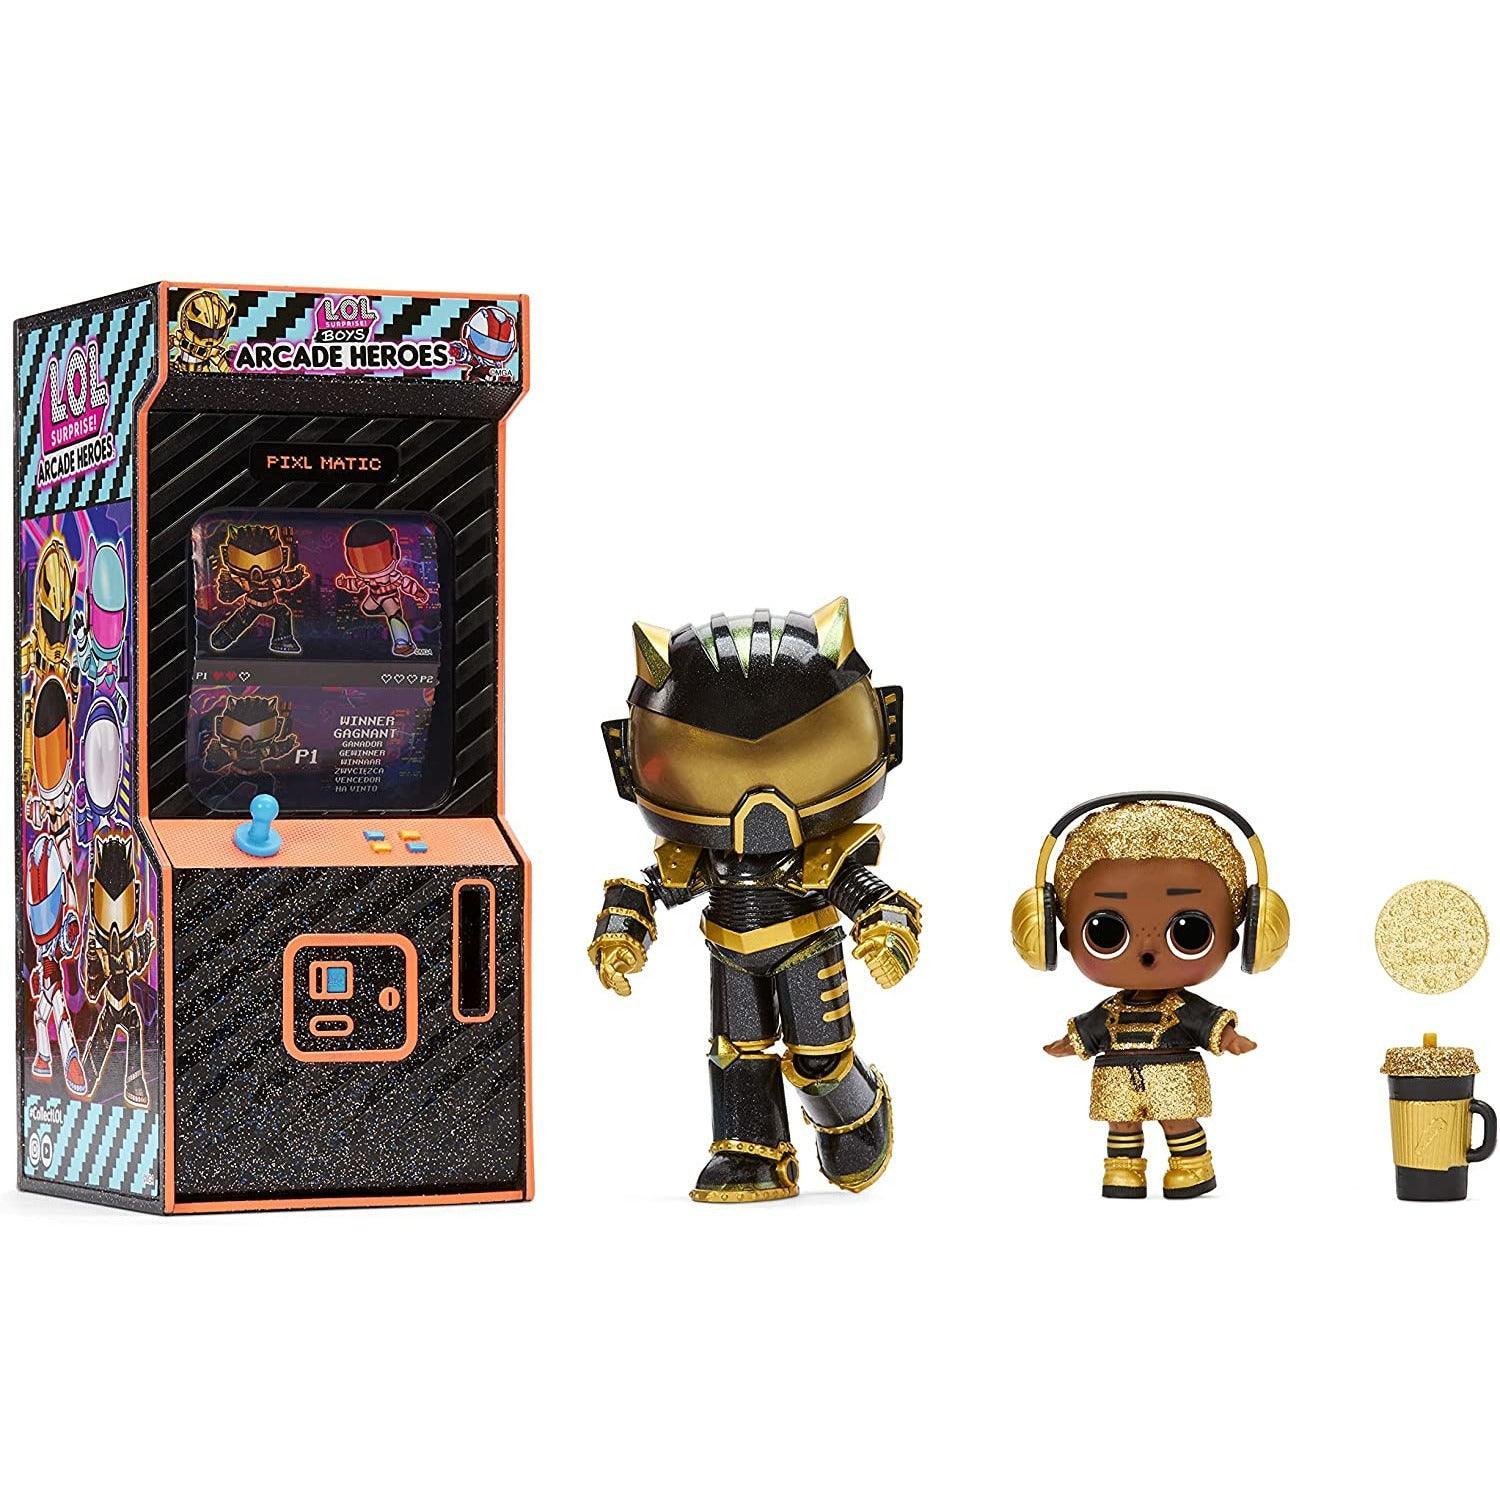 LOL Surprise Boys Arcade Heroes Series 2 Action Figure Doll with 15 Surprises - BumbleToys - 4+ Years, 5-7 Years, Amazon, Boys, Dolls, Fashion Dolls & Accessories, Girls, LOL